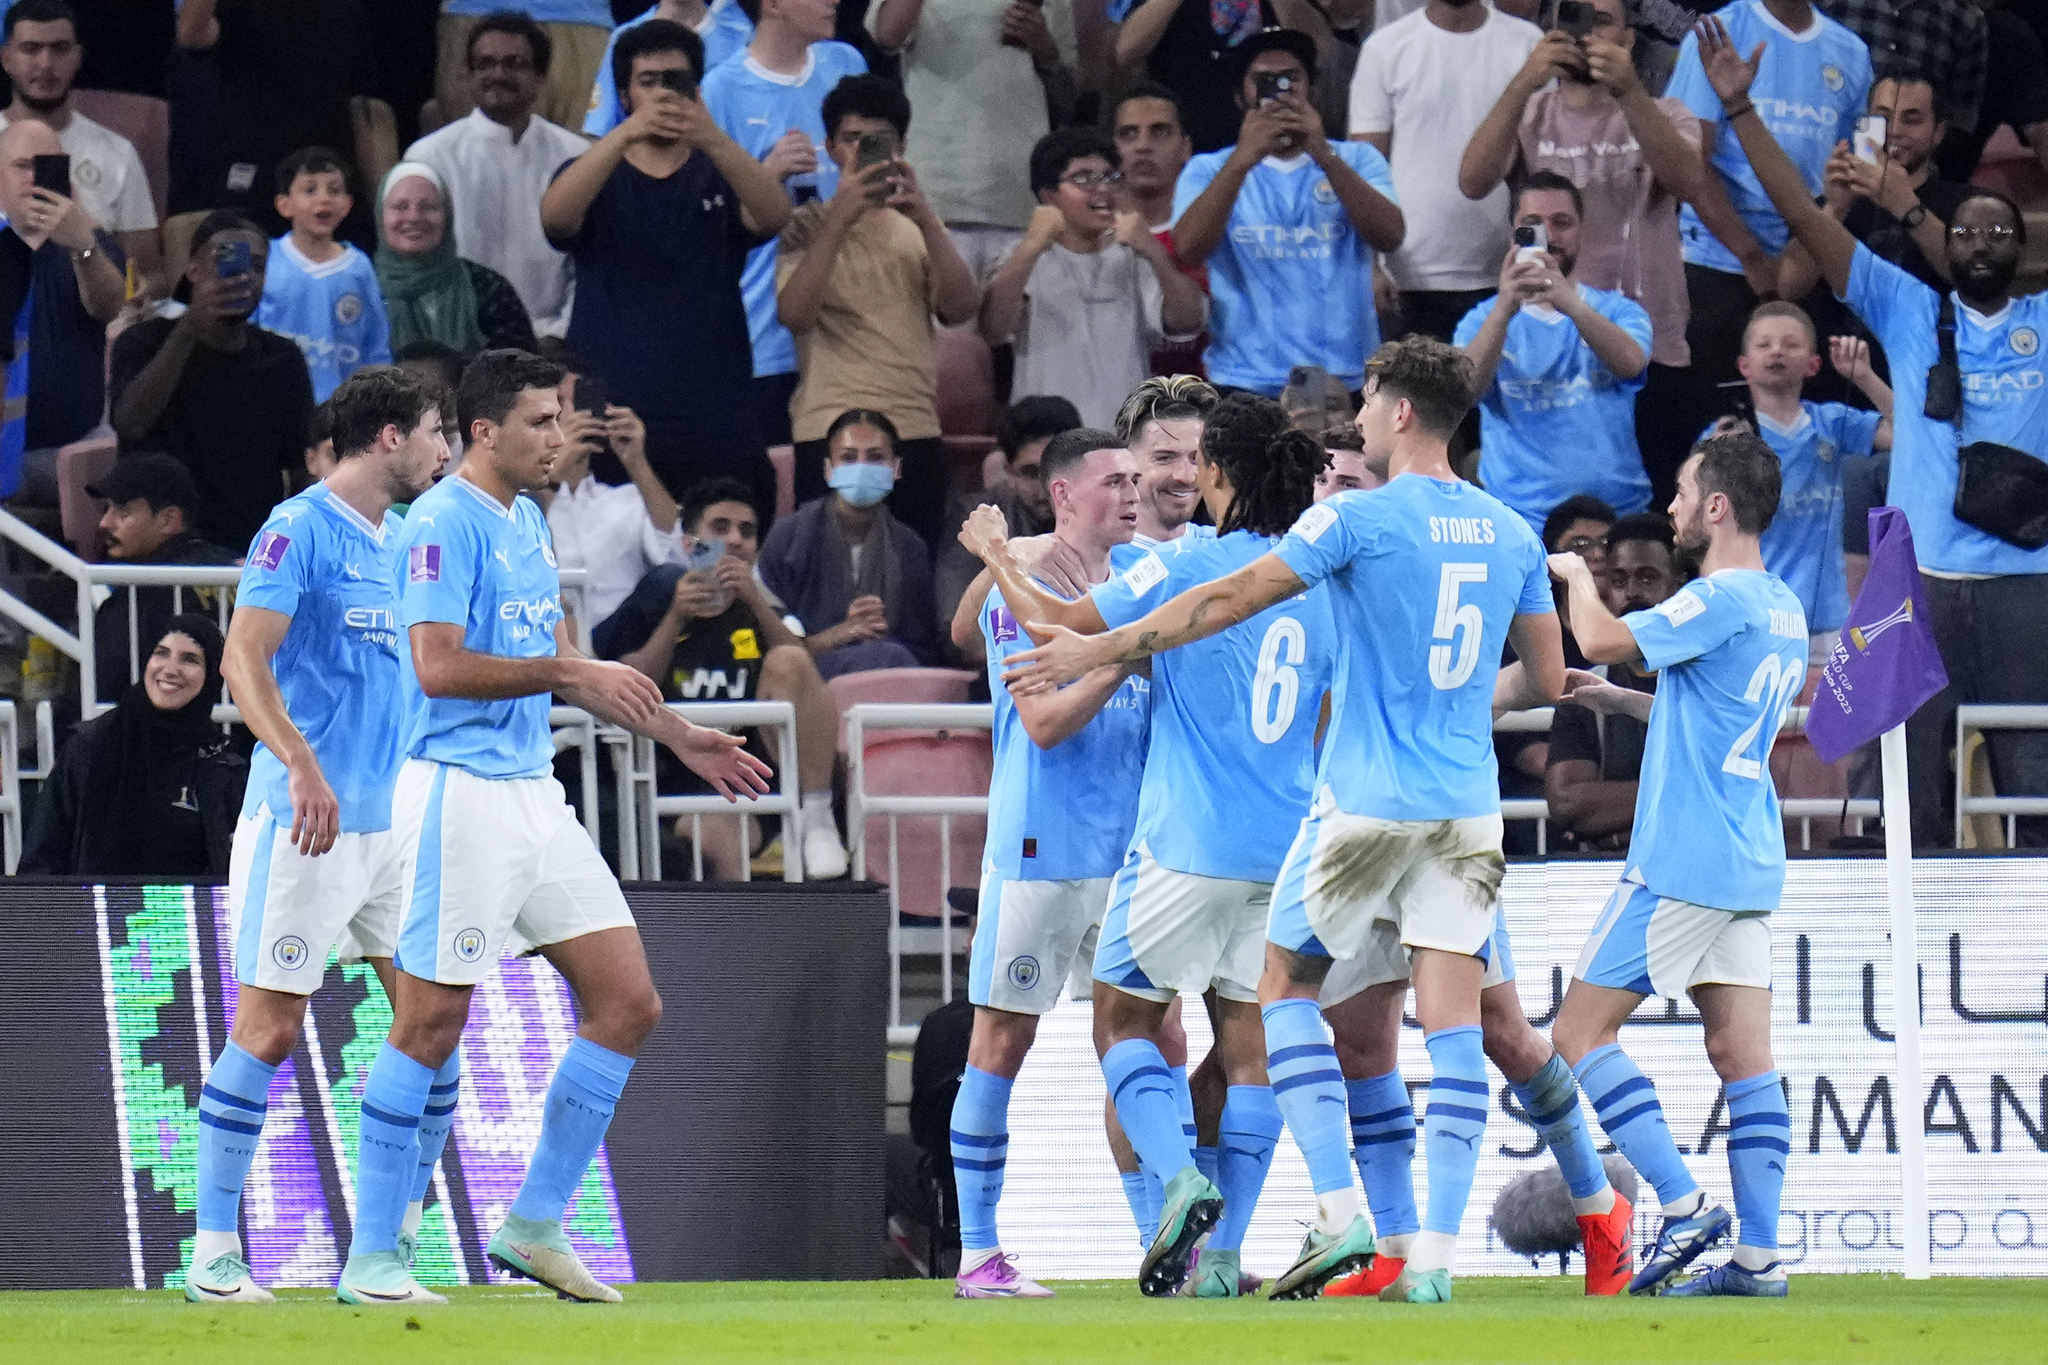 Manchester City players celebrate after scoring their second goal